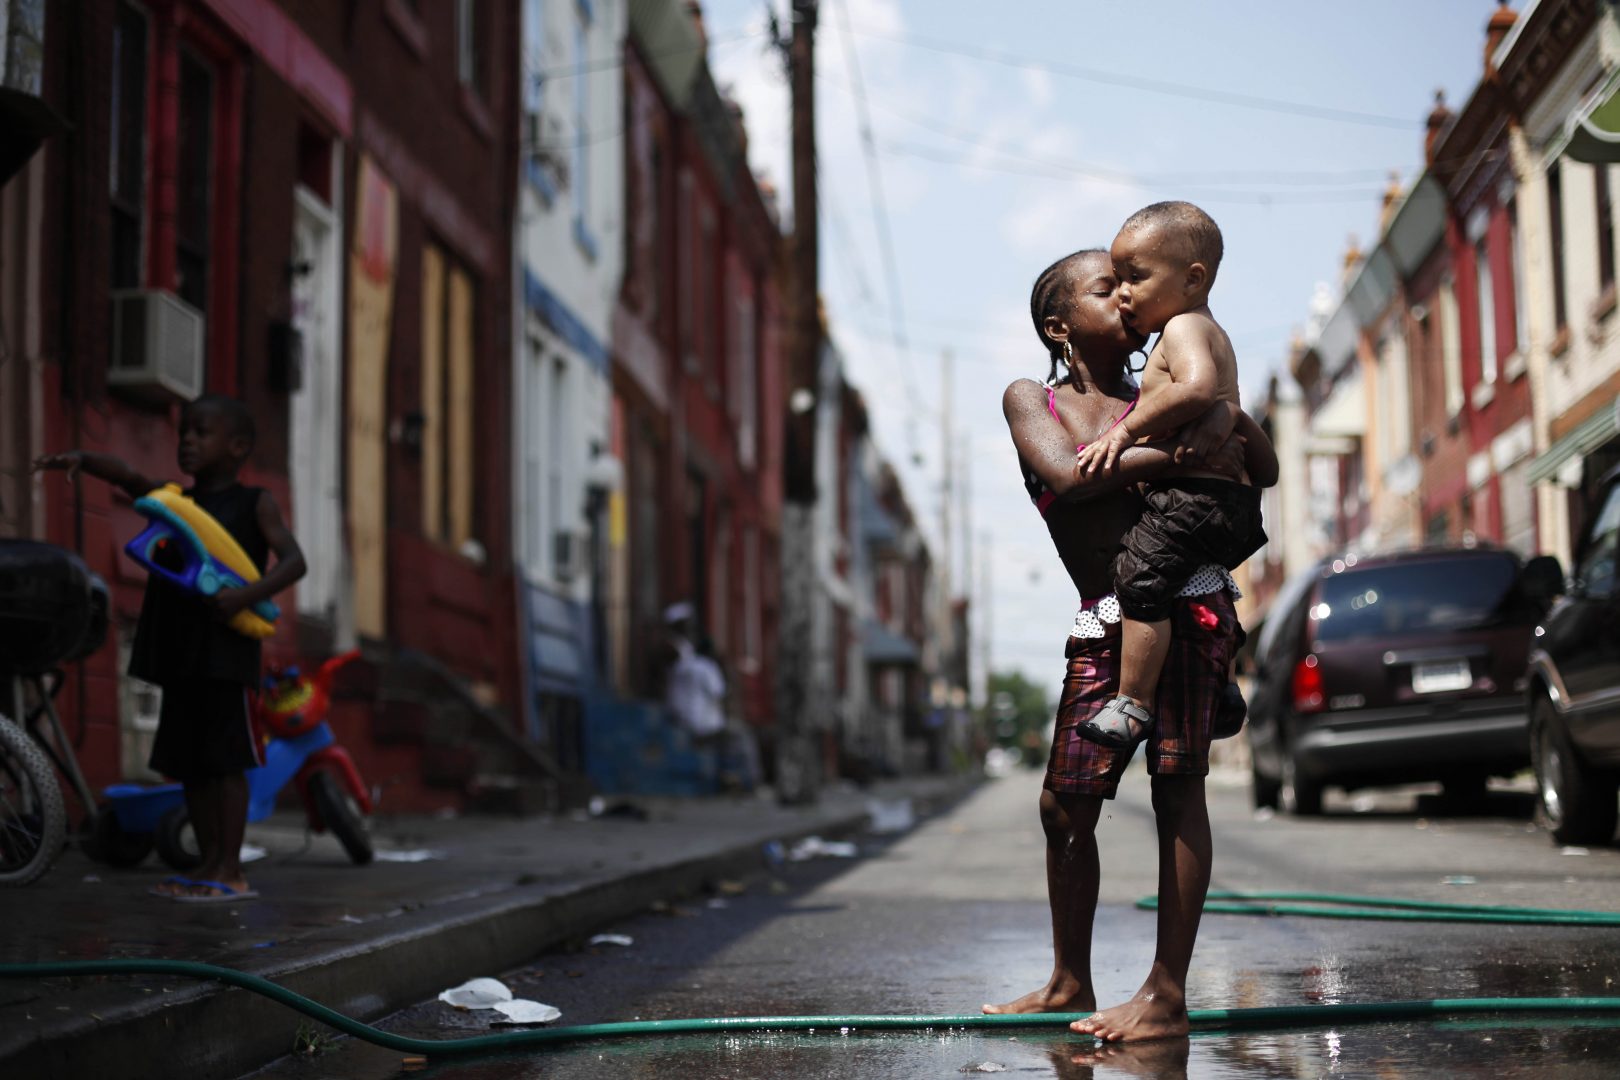 In this photo from July 2011, Aniyah Davis kisses her cousin William Respes as they play in water from a garden hose during a  heat wave in Philadelphia.  